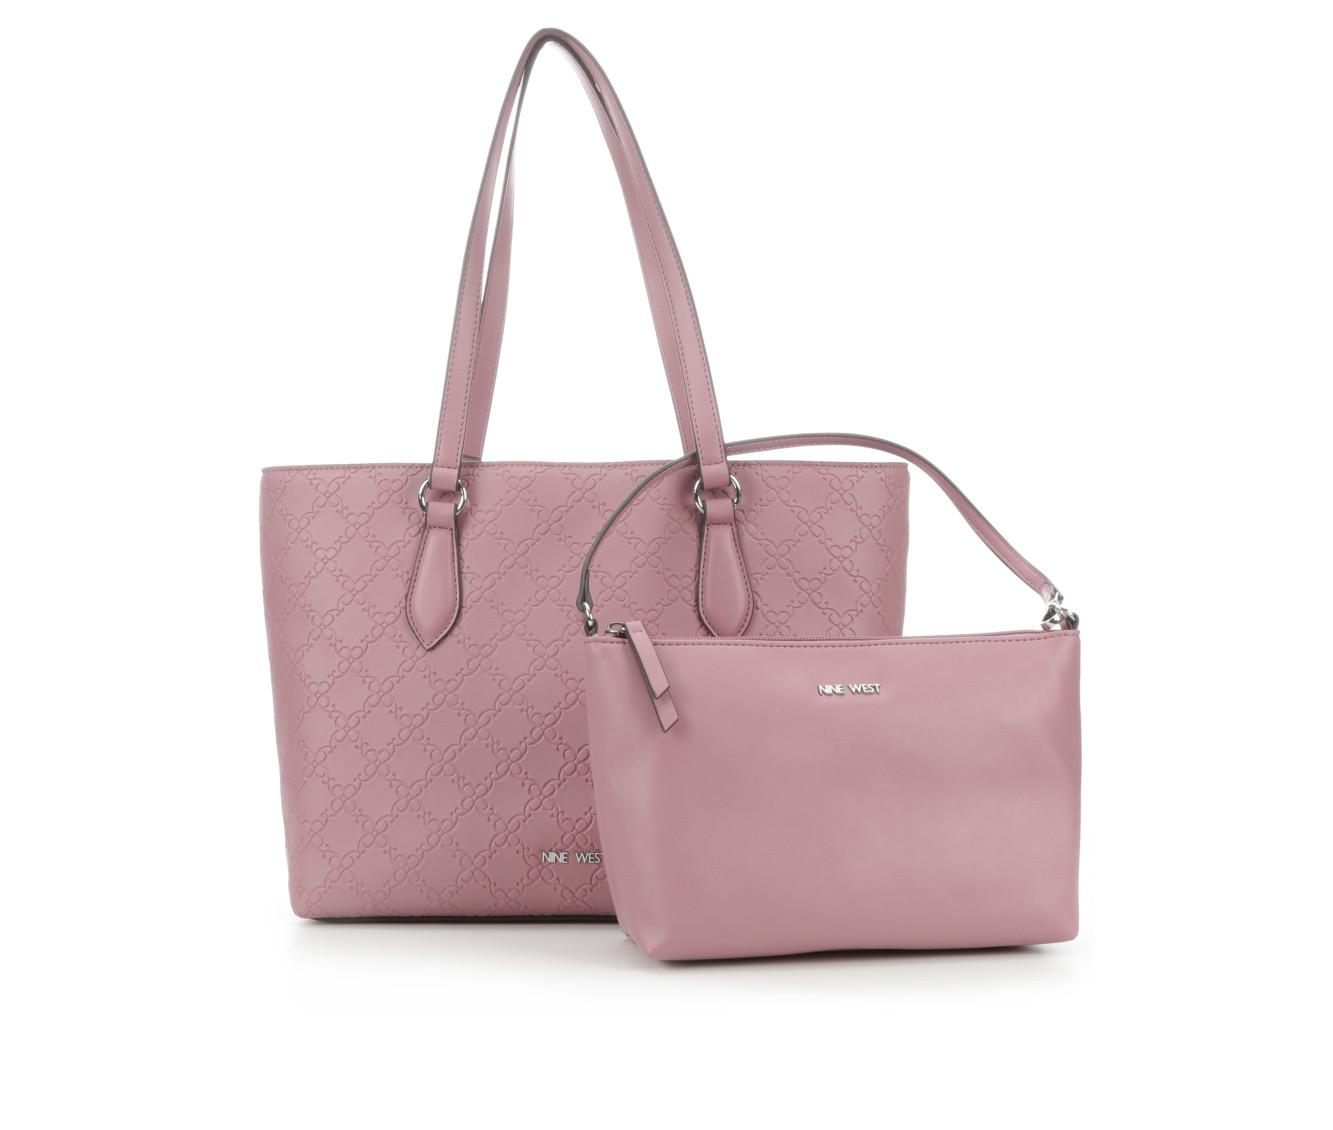 CLEARANCE Pink View All Handbags & Wallets for Handbags & Accessories -  JCPenney